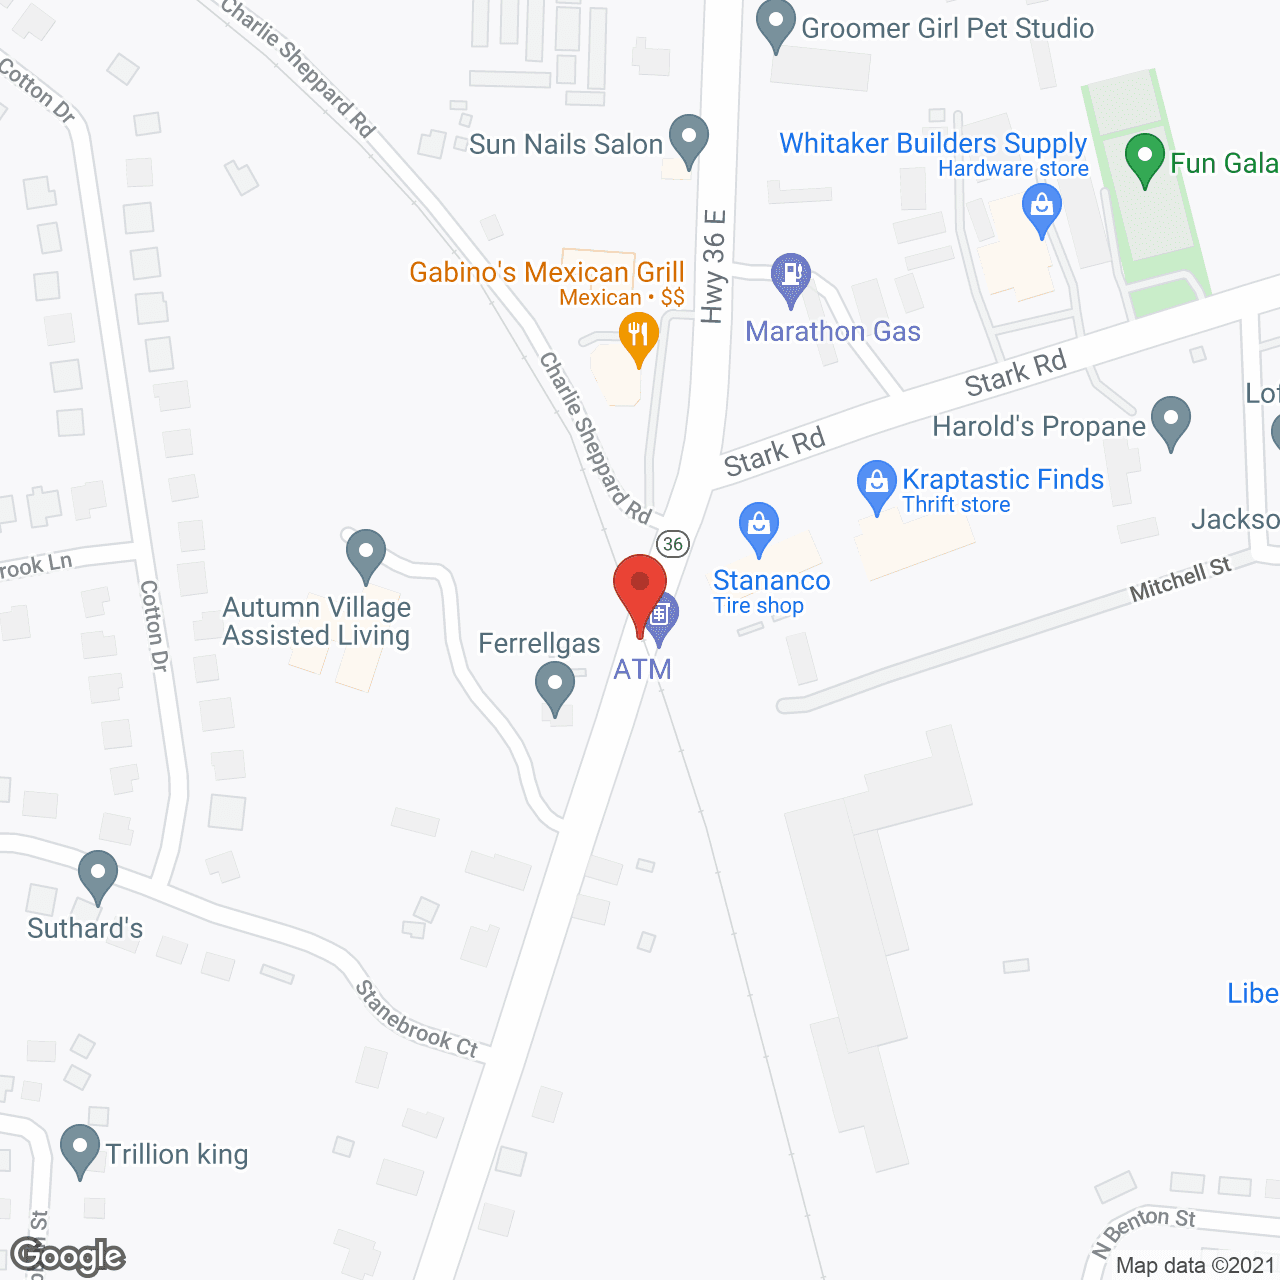 Autumn Village Assisted Living in google map